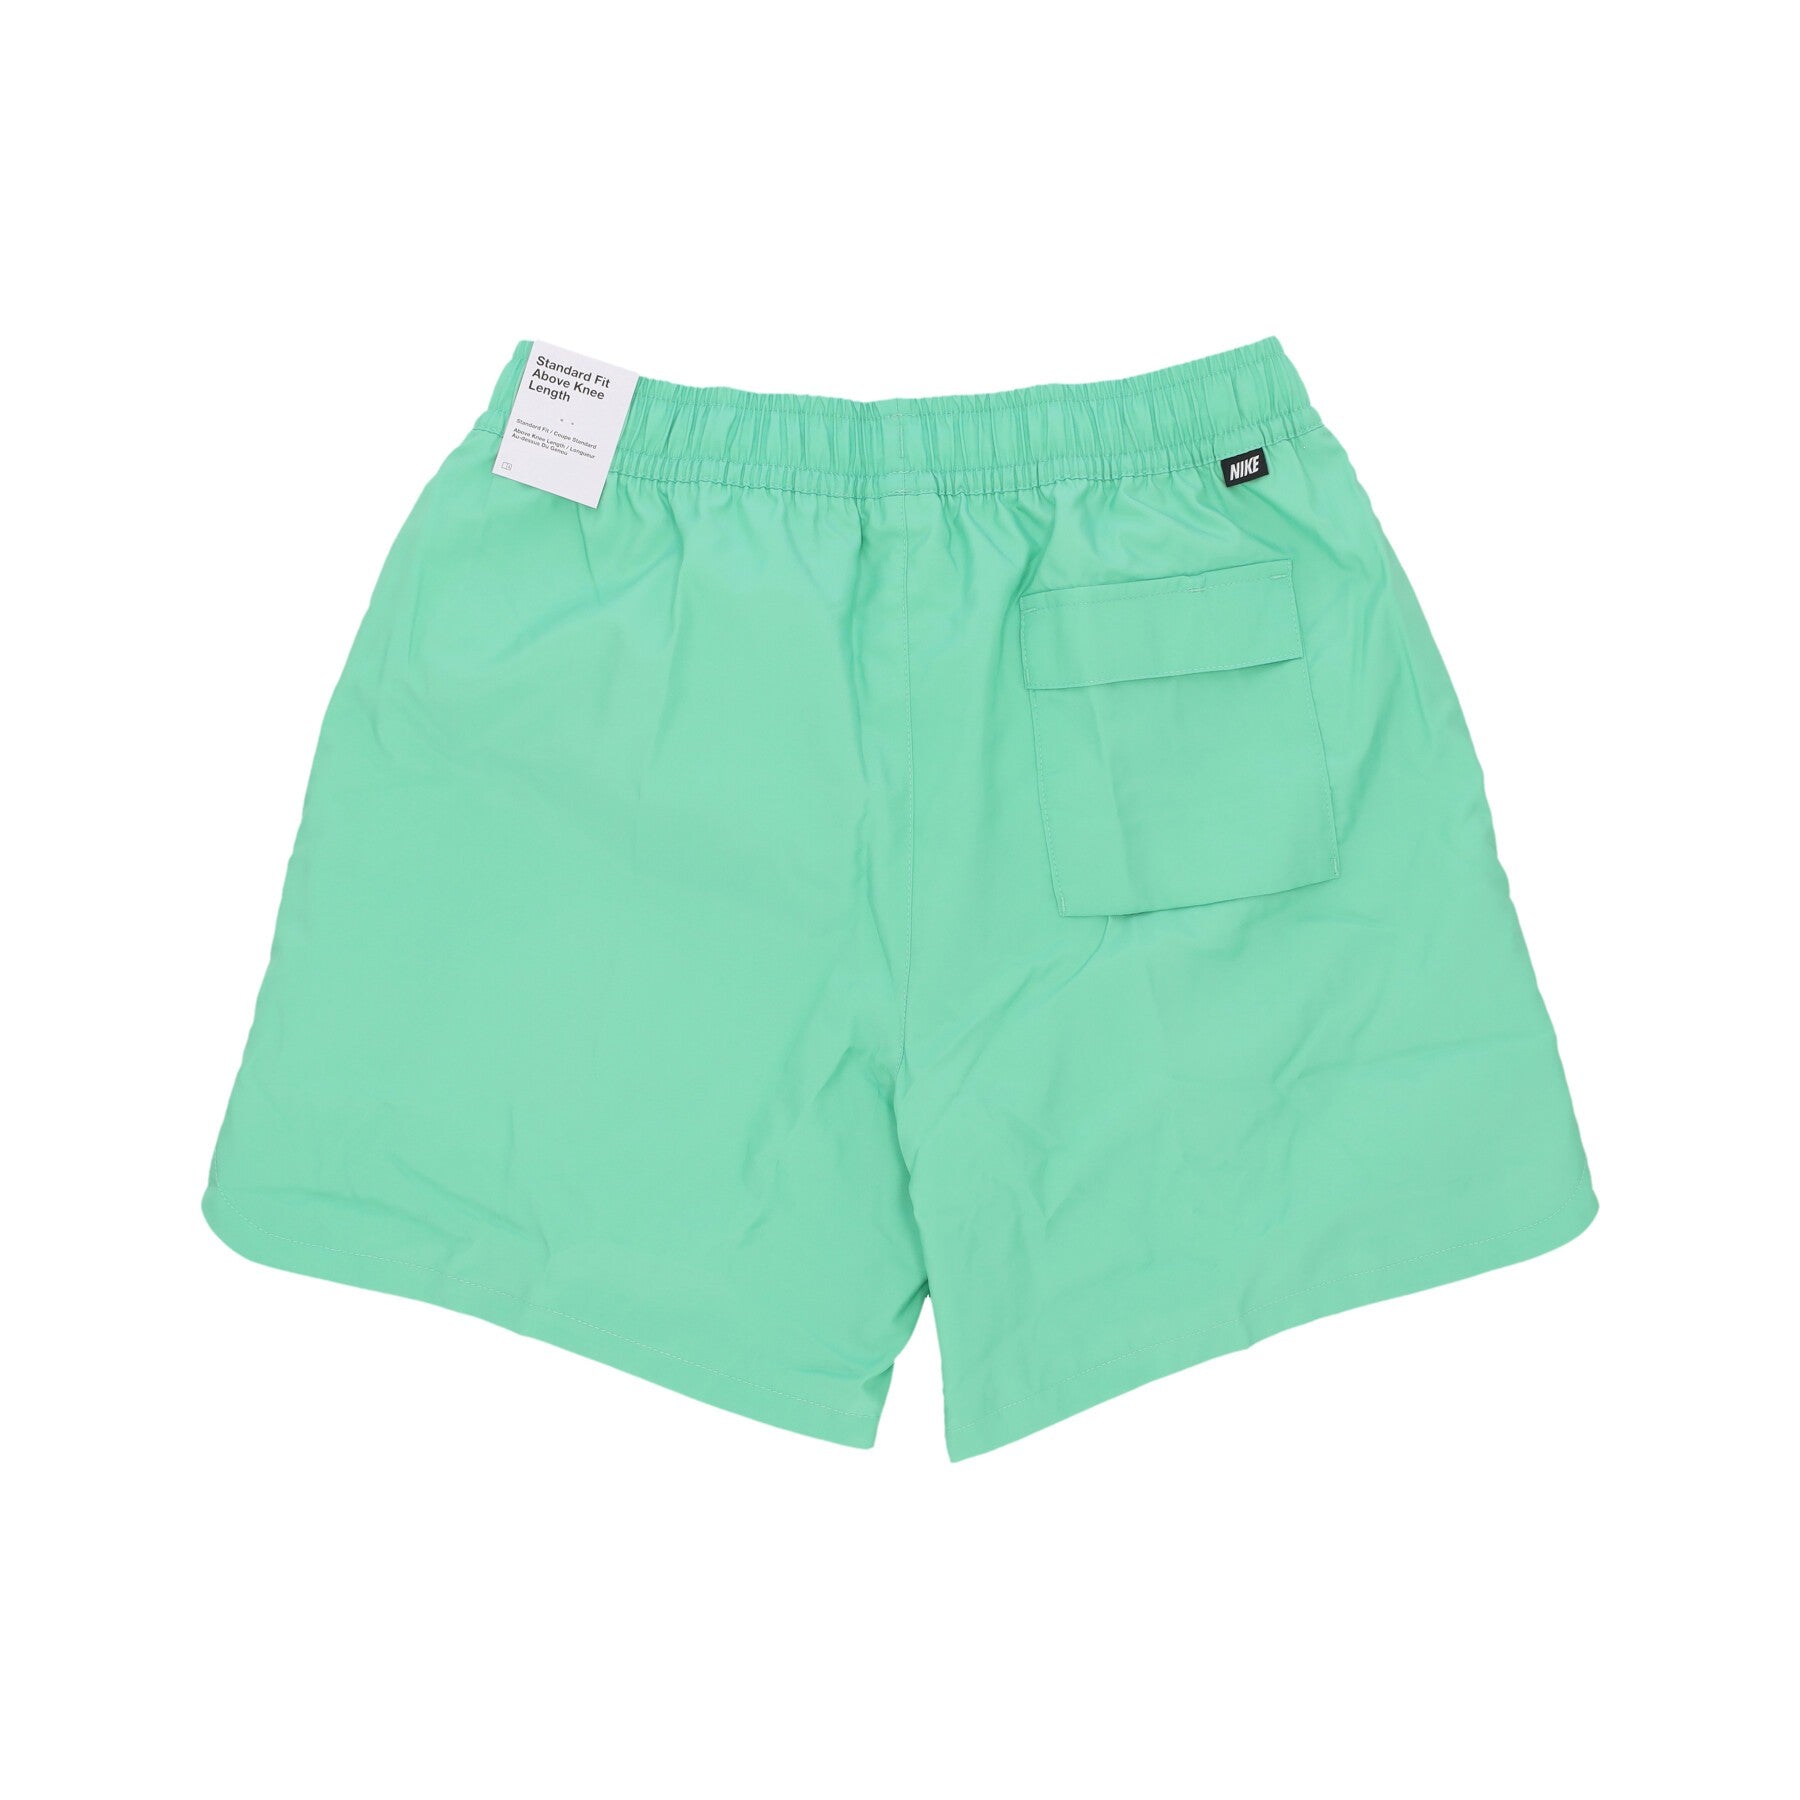 Costume Pantaloncino Uomo Club Woven Lined Flow Short Spring Green/white DM6829